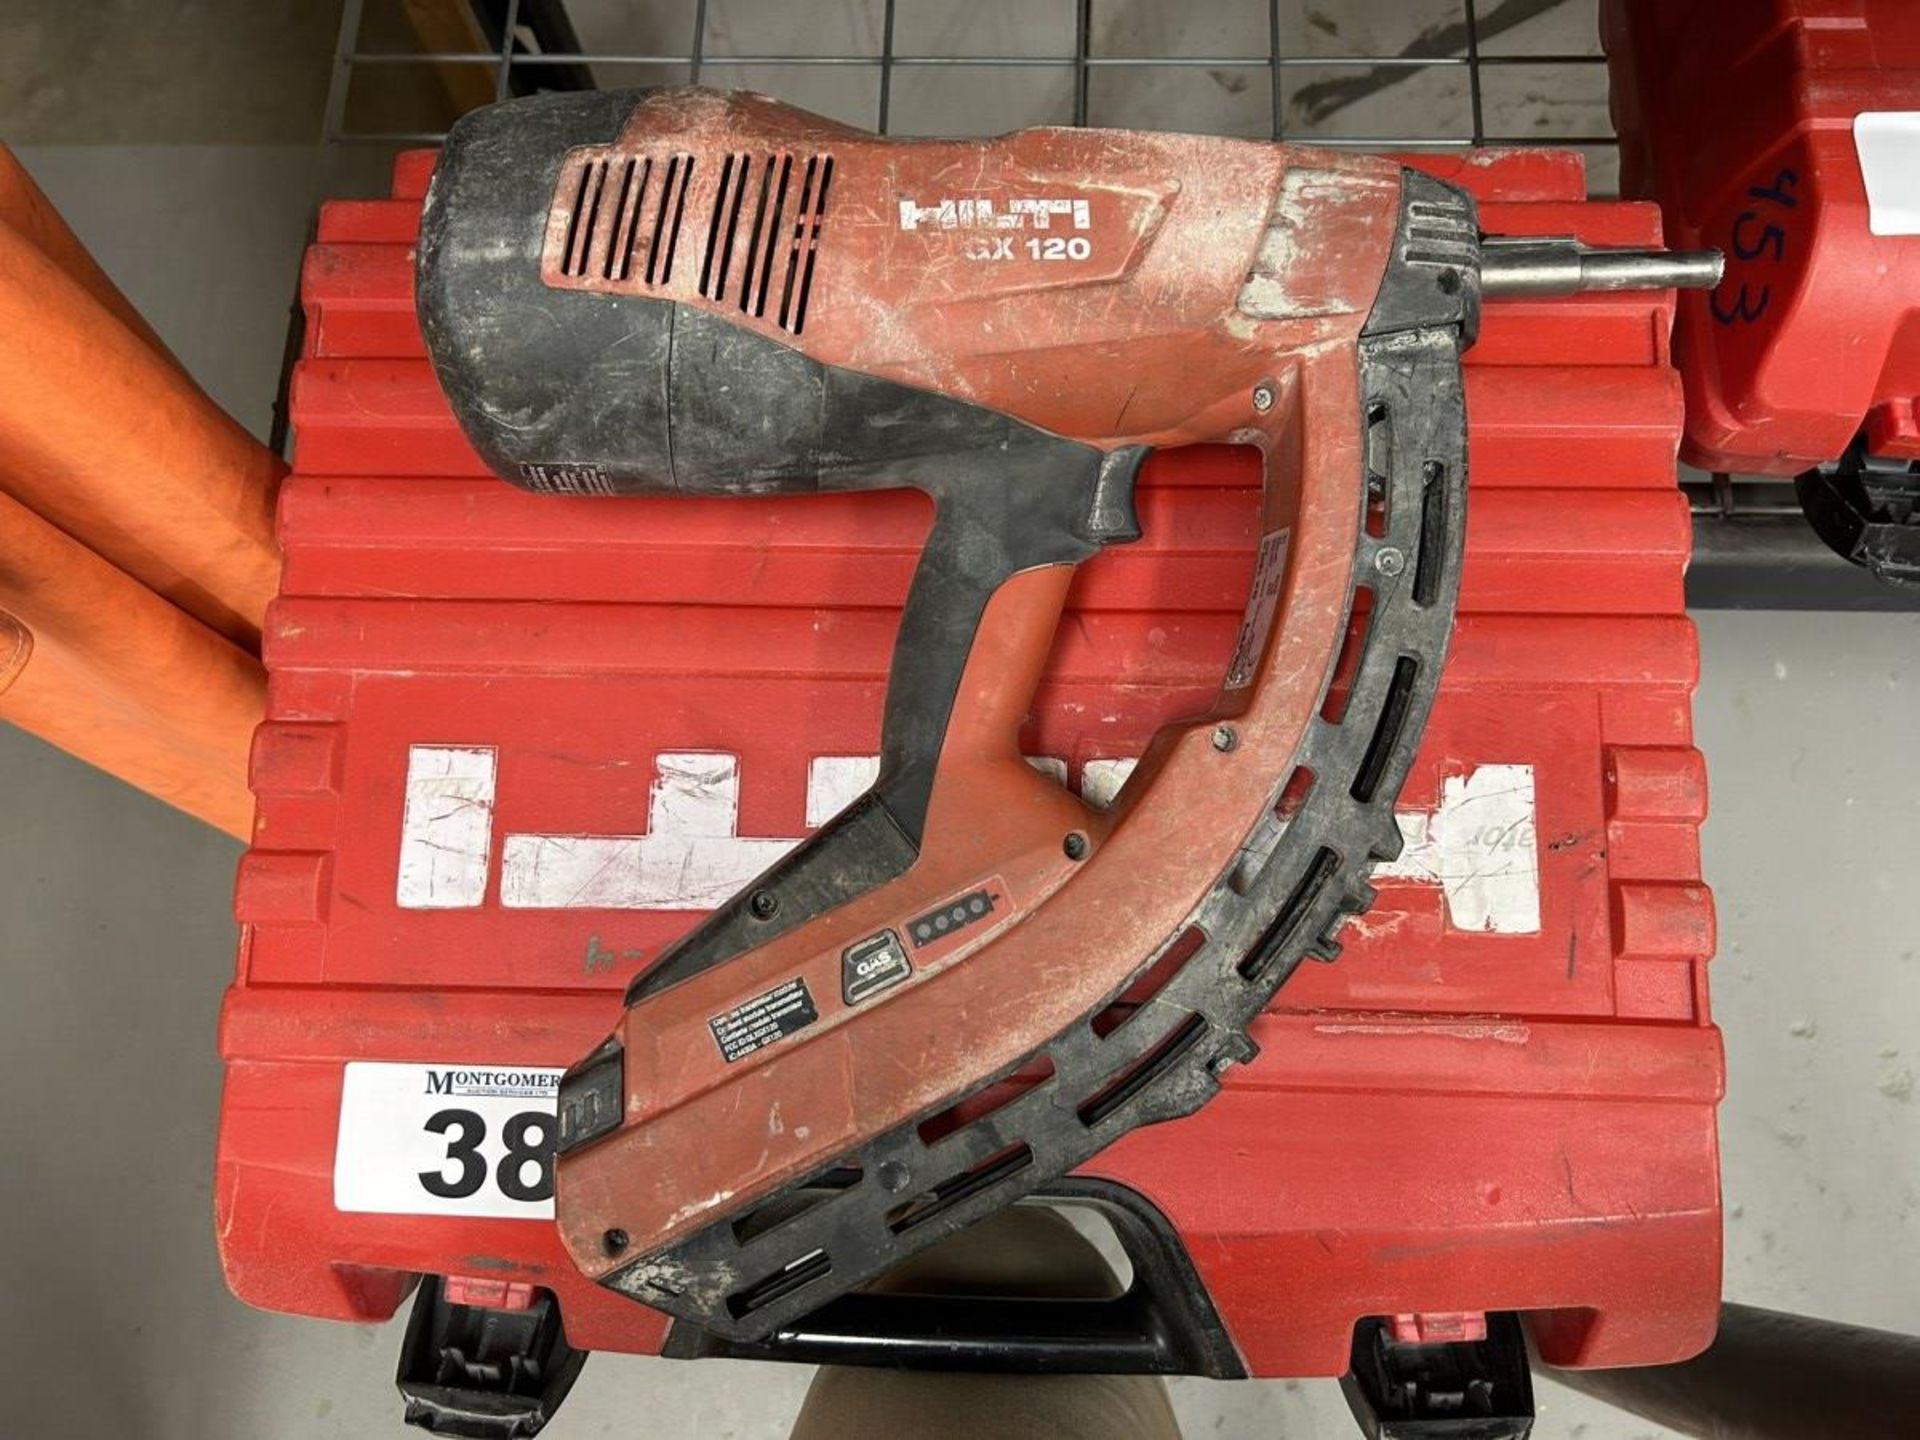 HILTI GX 120 GAS-ACTUATED FASTENING TOOL GAS NAILER WITH SINGLE POWER SOURCE FOR DRYWALL TRACK, - Image 3 of 5